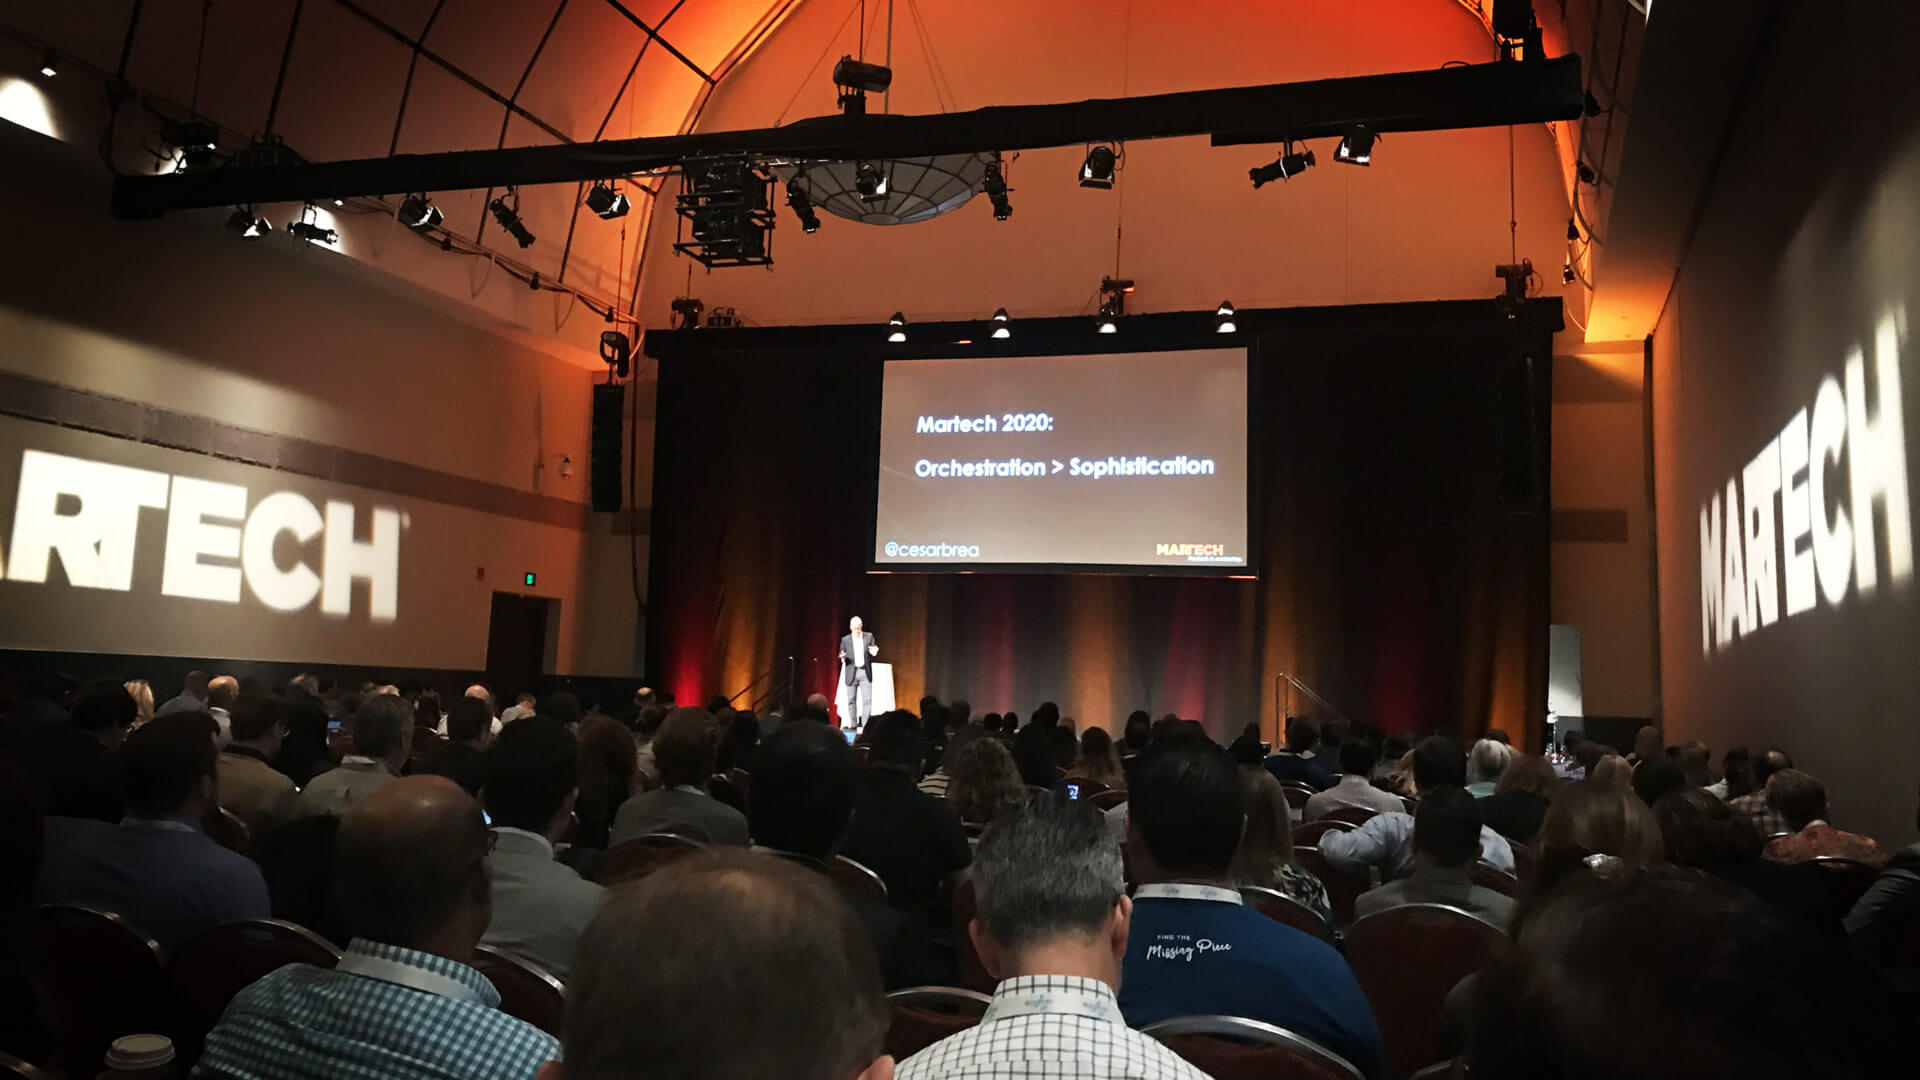 MarTech East keynote: Better marketing starts with better orchestration